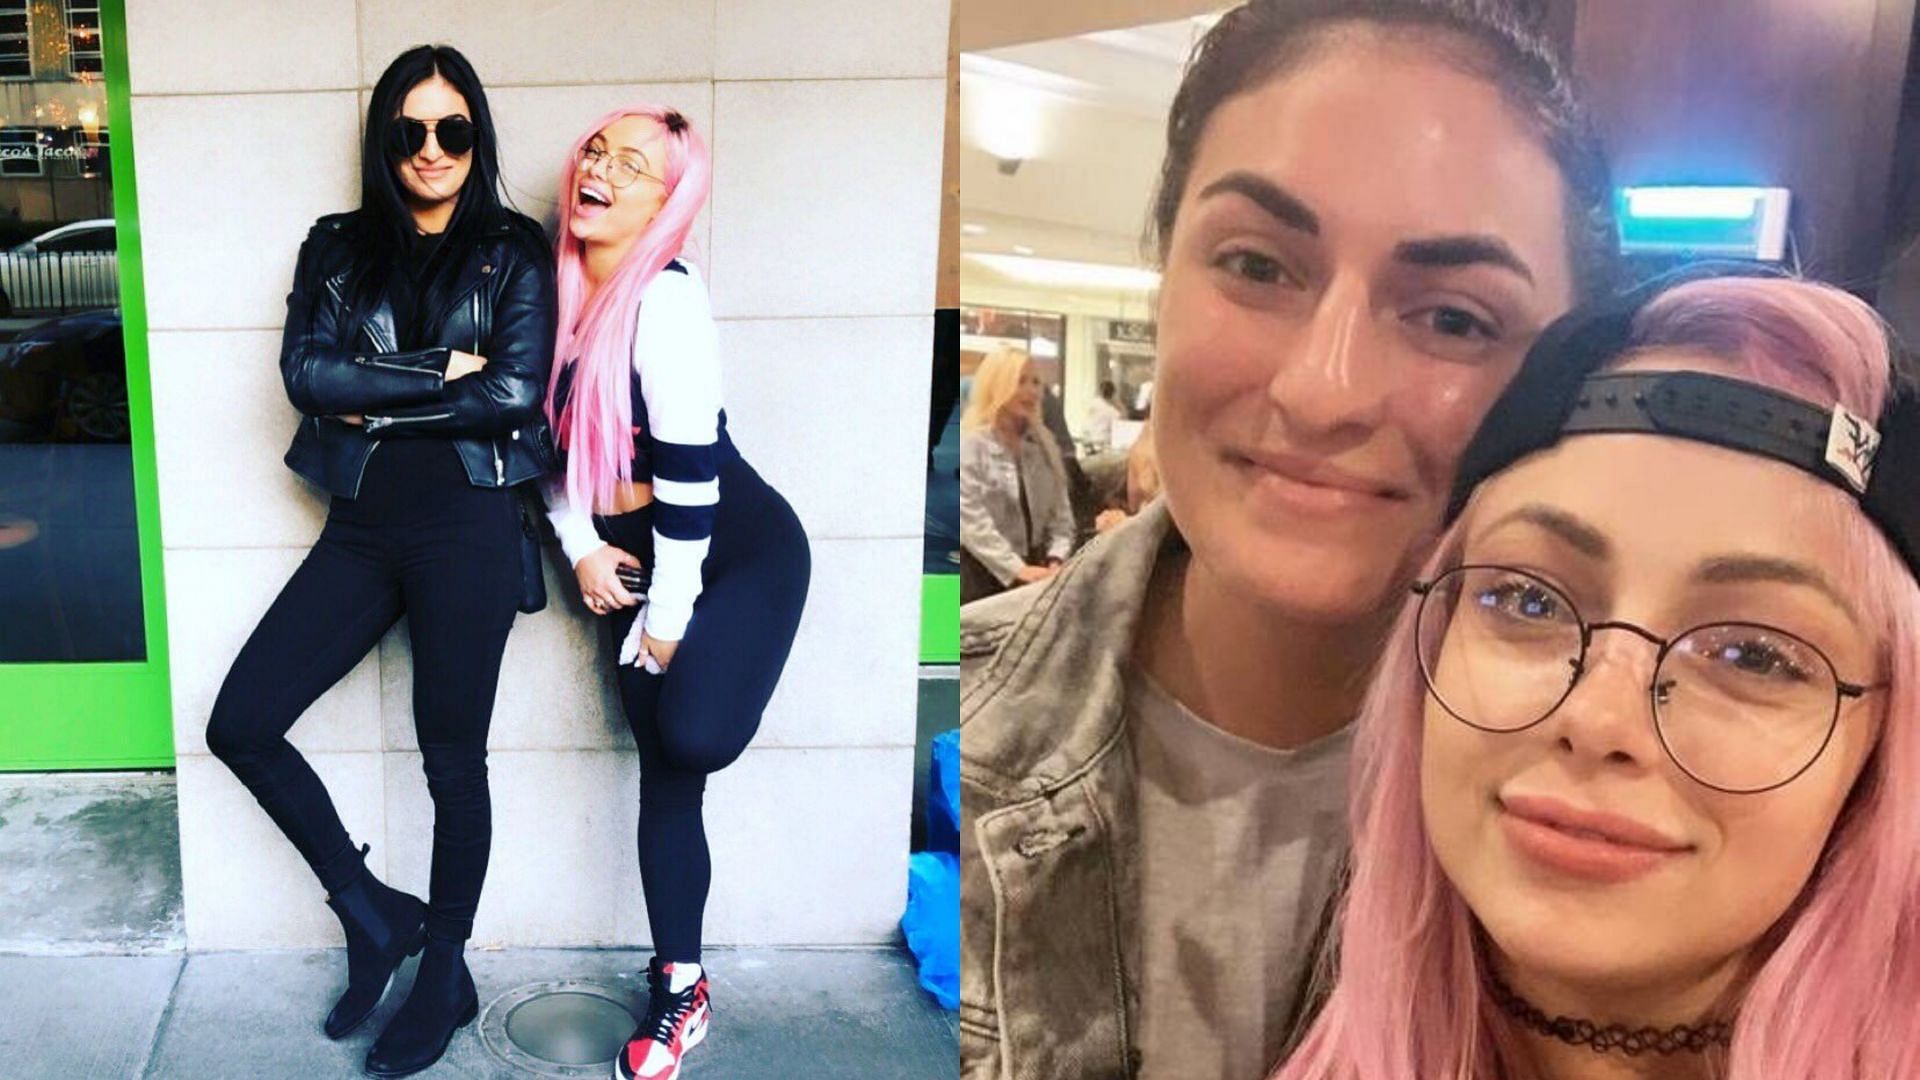 Rumors suggested that Sonya Deville and Liv Morgan were a couple in 2020